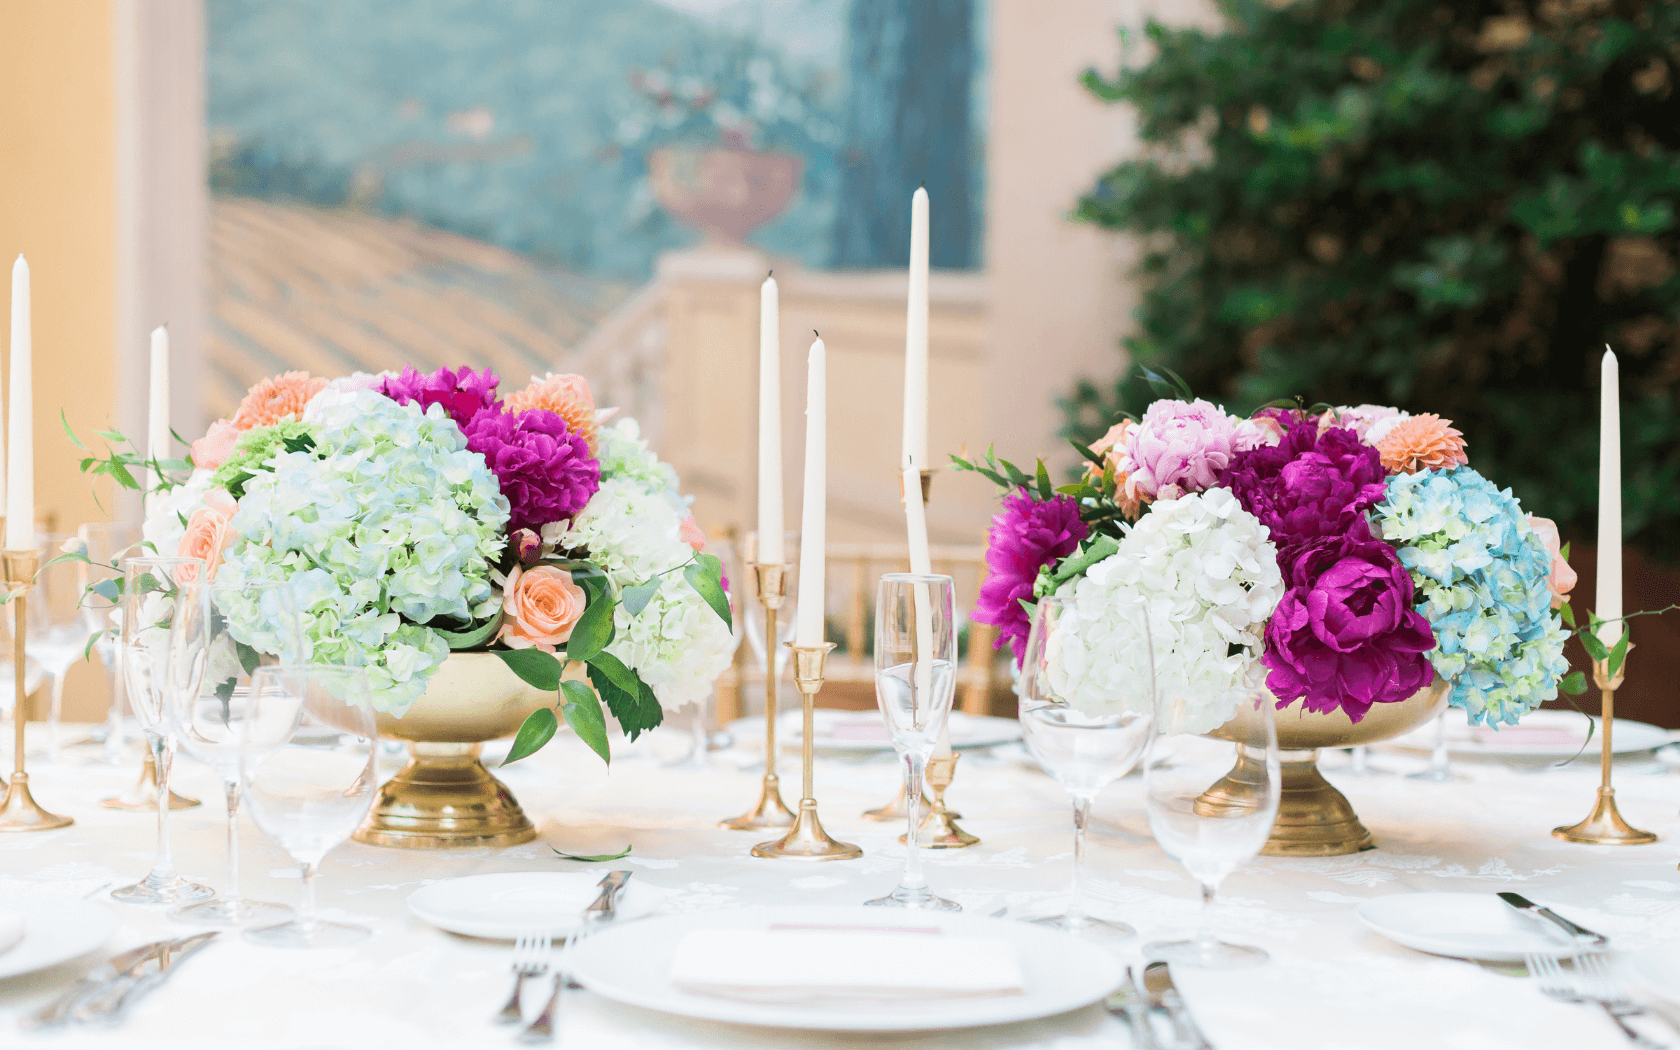 candlesticks and wedding floral arrangements on table